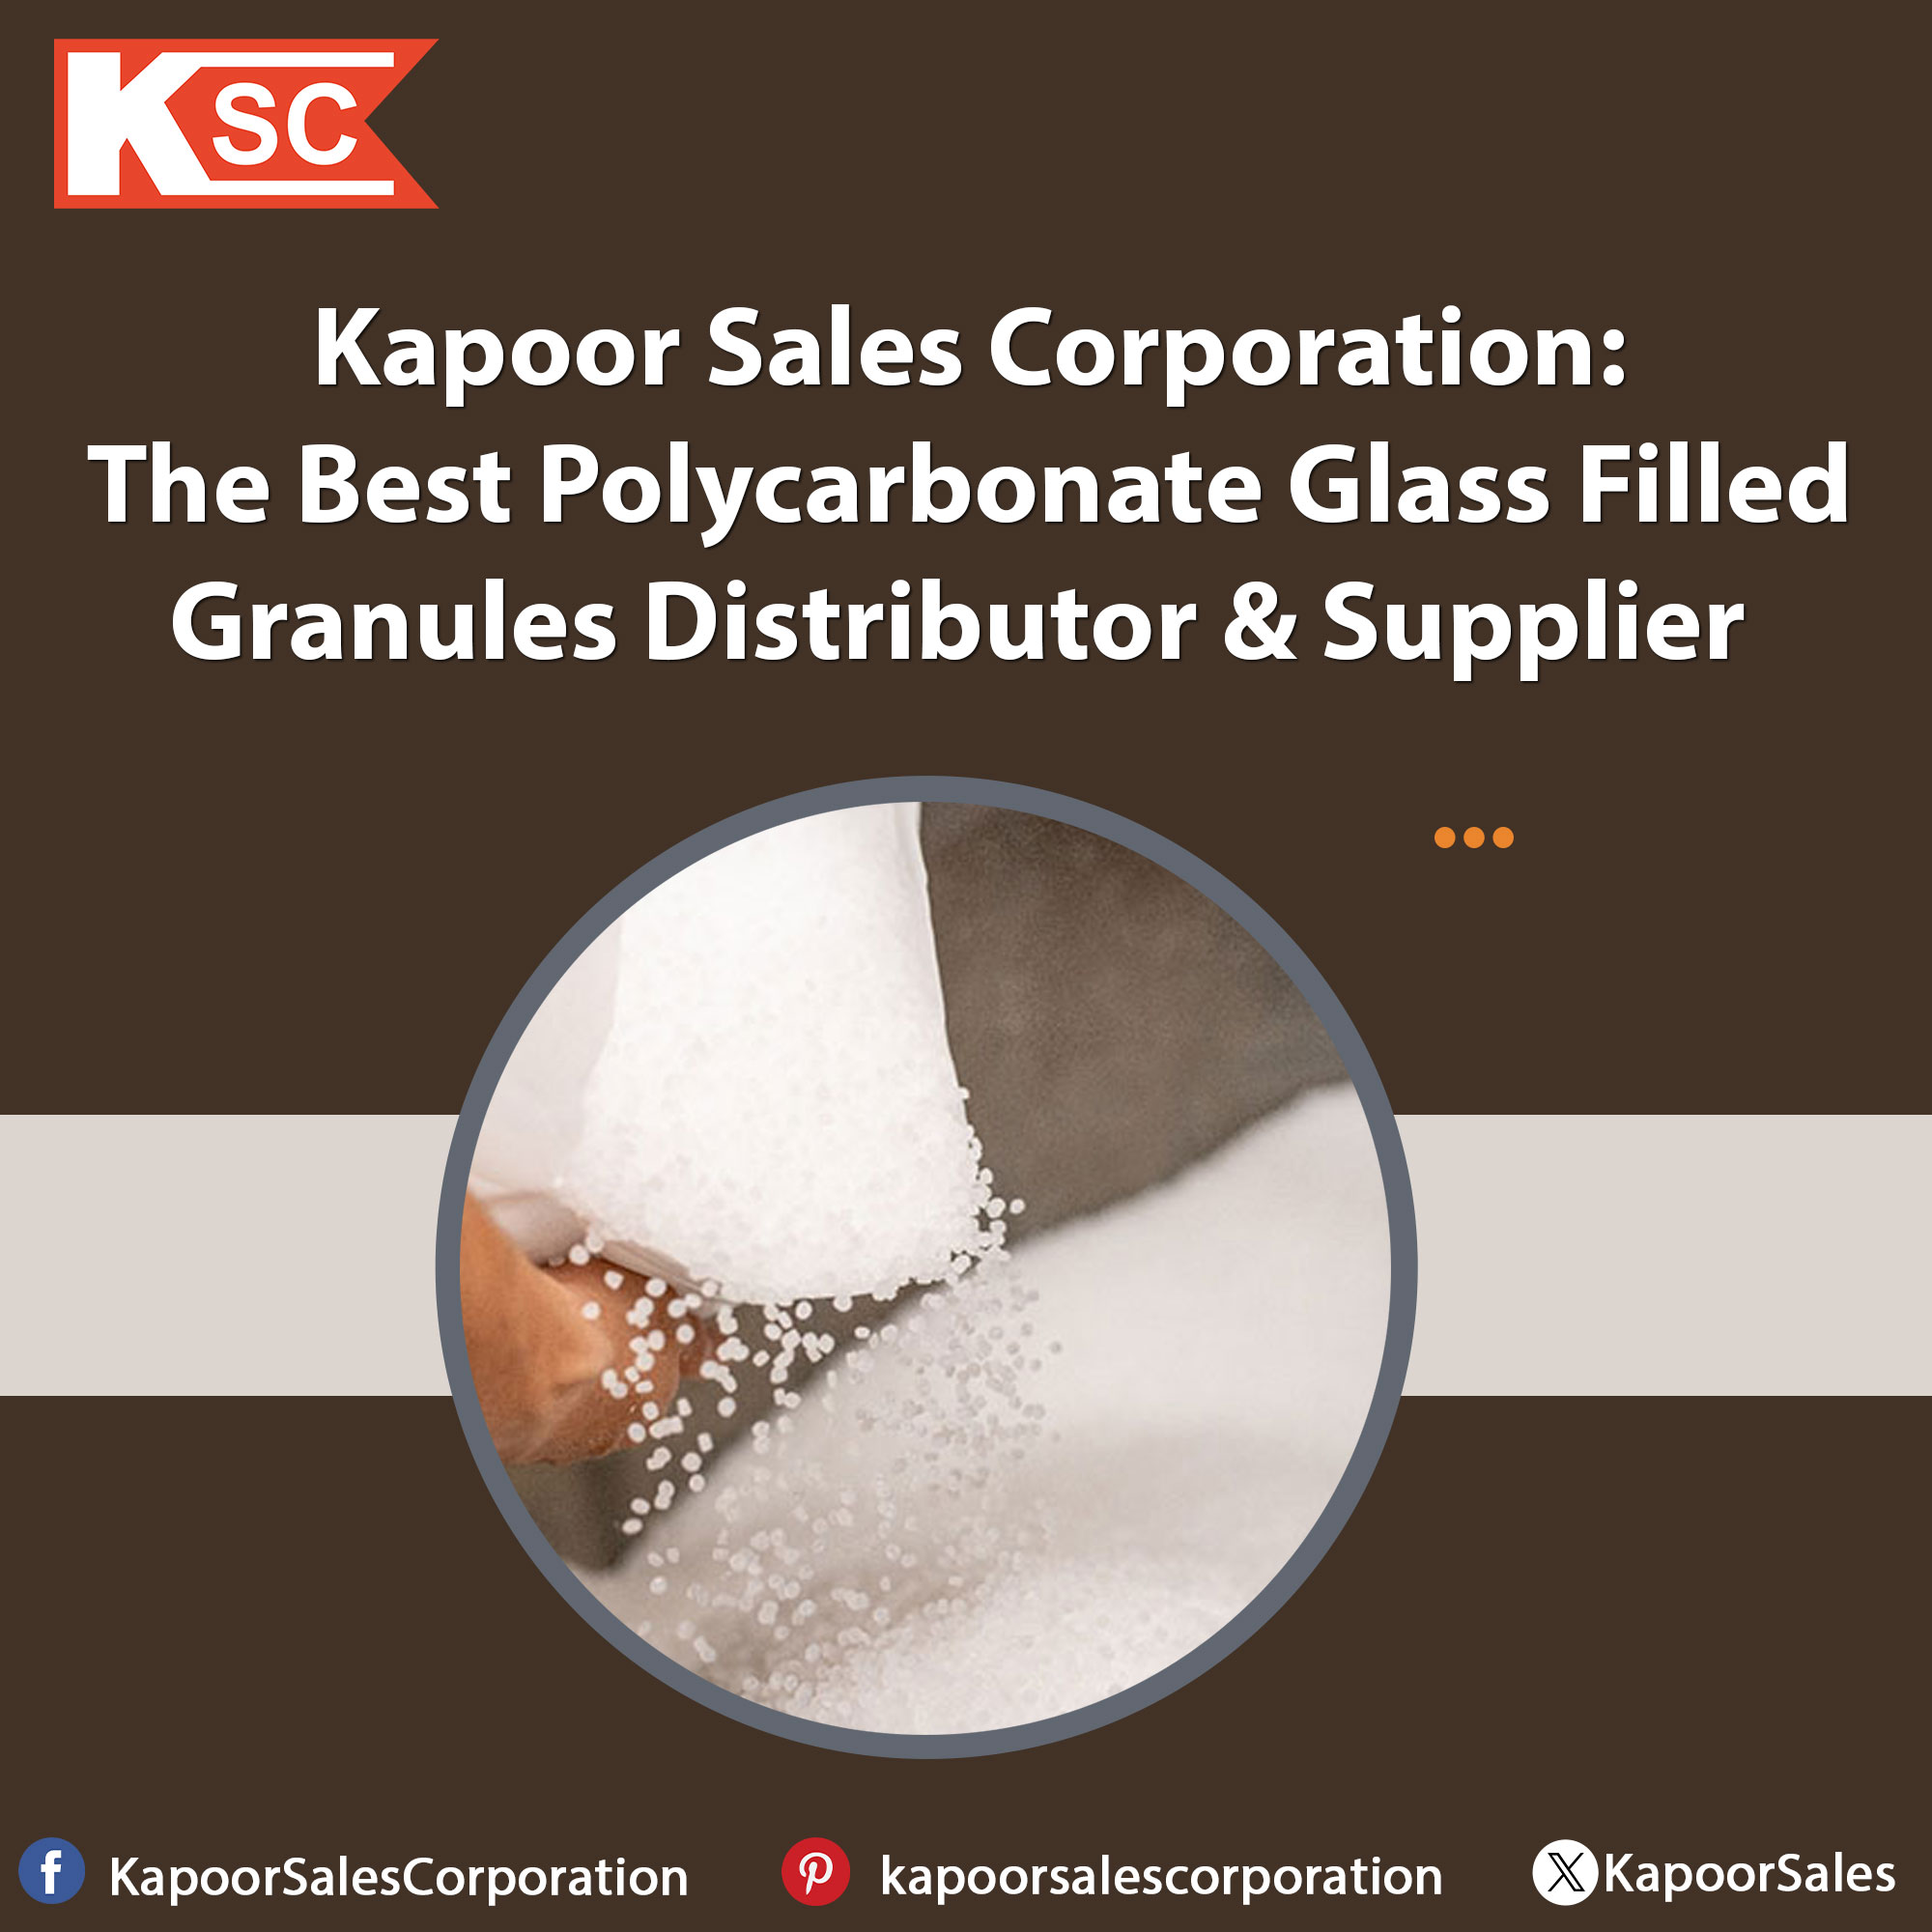 Kapoor Sales Corporation: The Best Polycarbonate Glass Filled Granules Distributor & Supplier